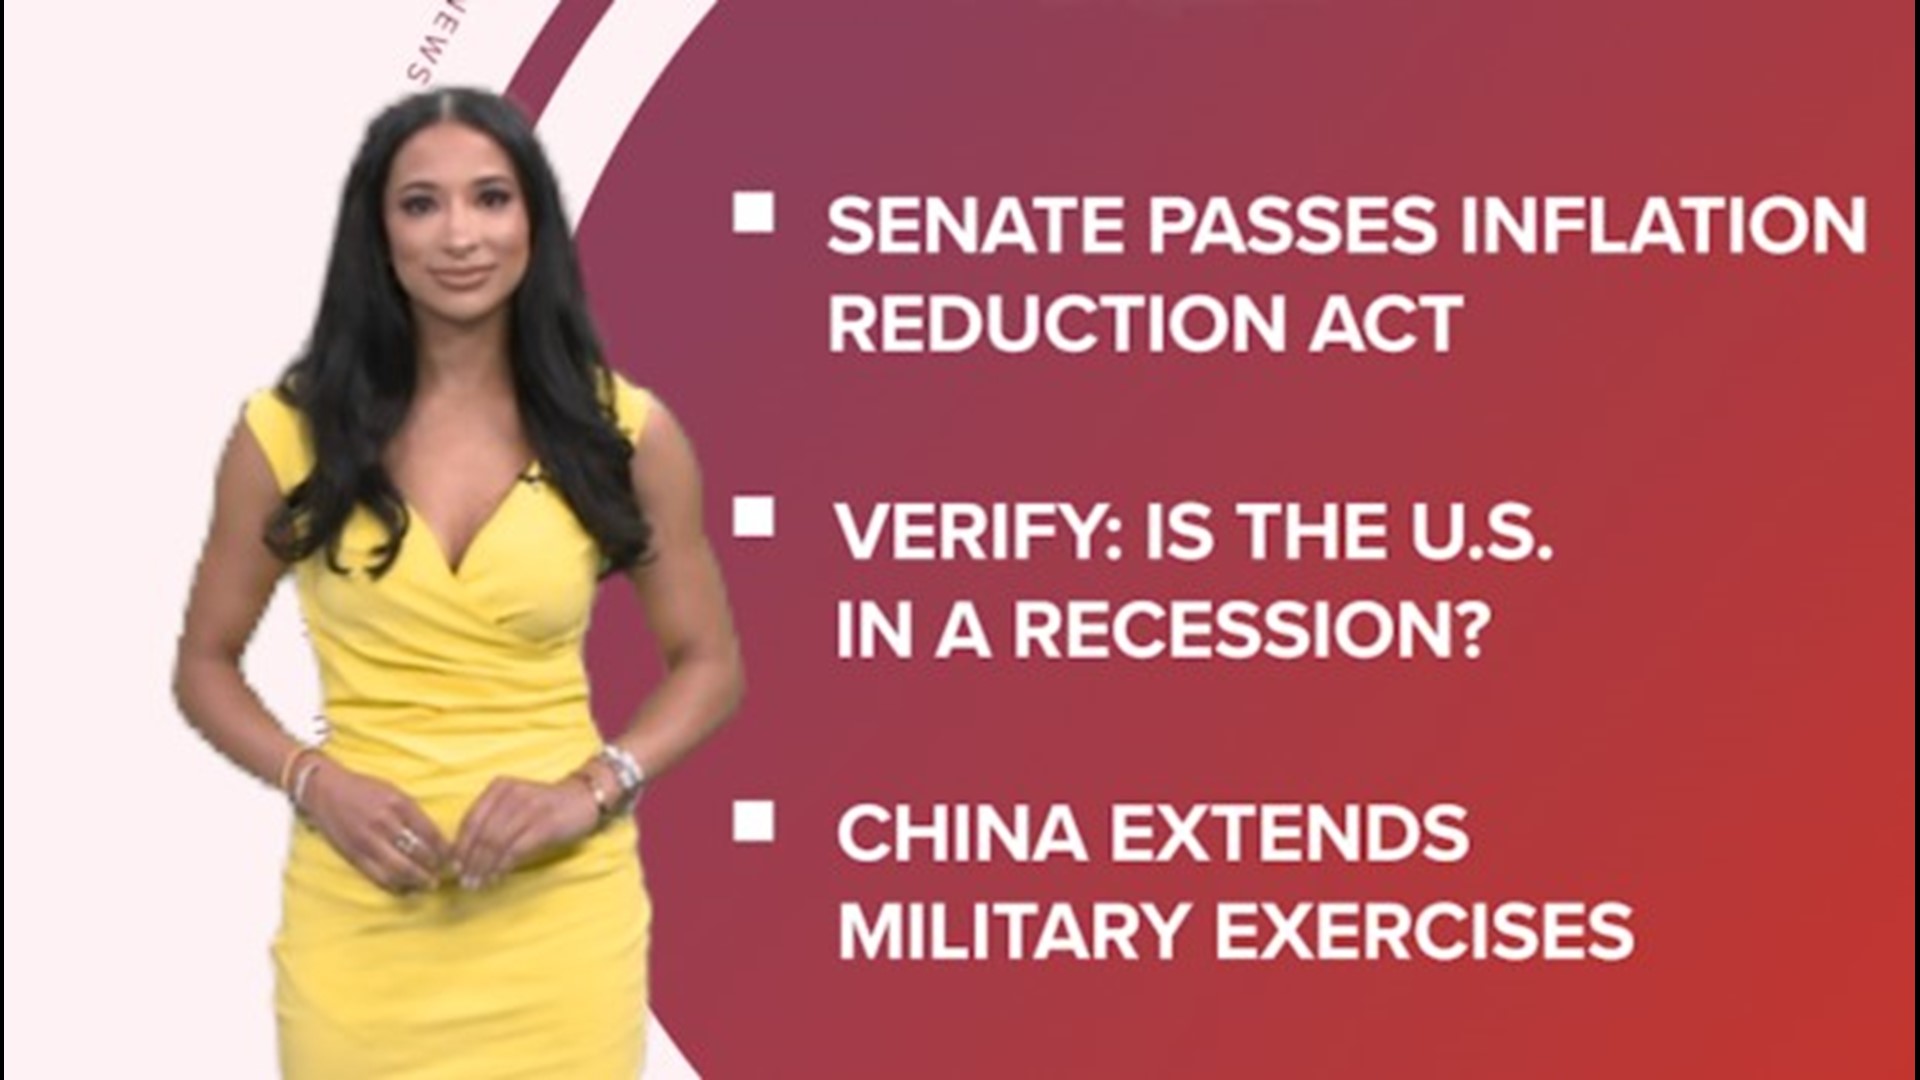 A look at what is happening in the news from the Senate passing the Inflation Reduction Act to China extending military exercises and return of sea turtles.